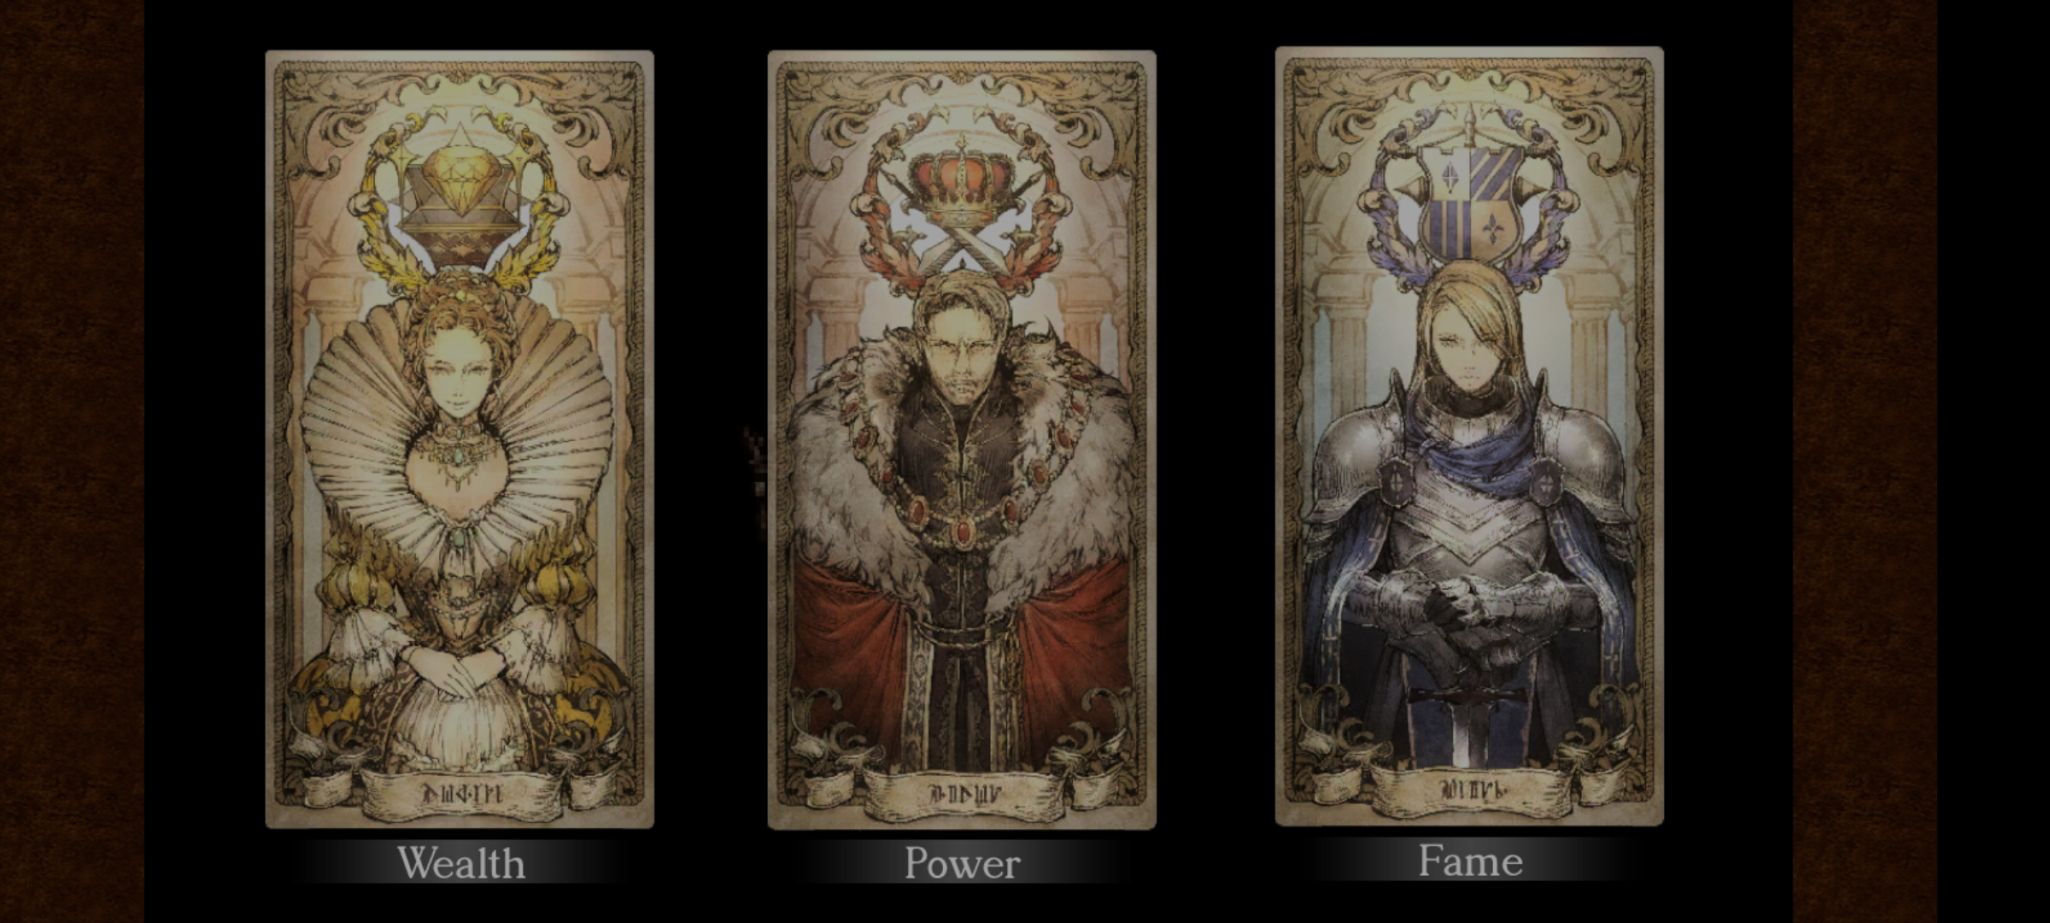 Story choices in Octopath Traveler: Champions of the Continent